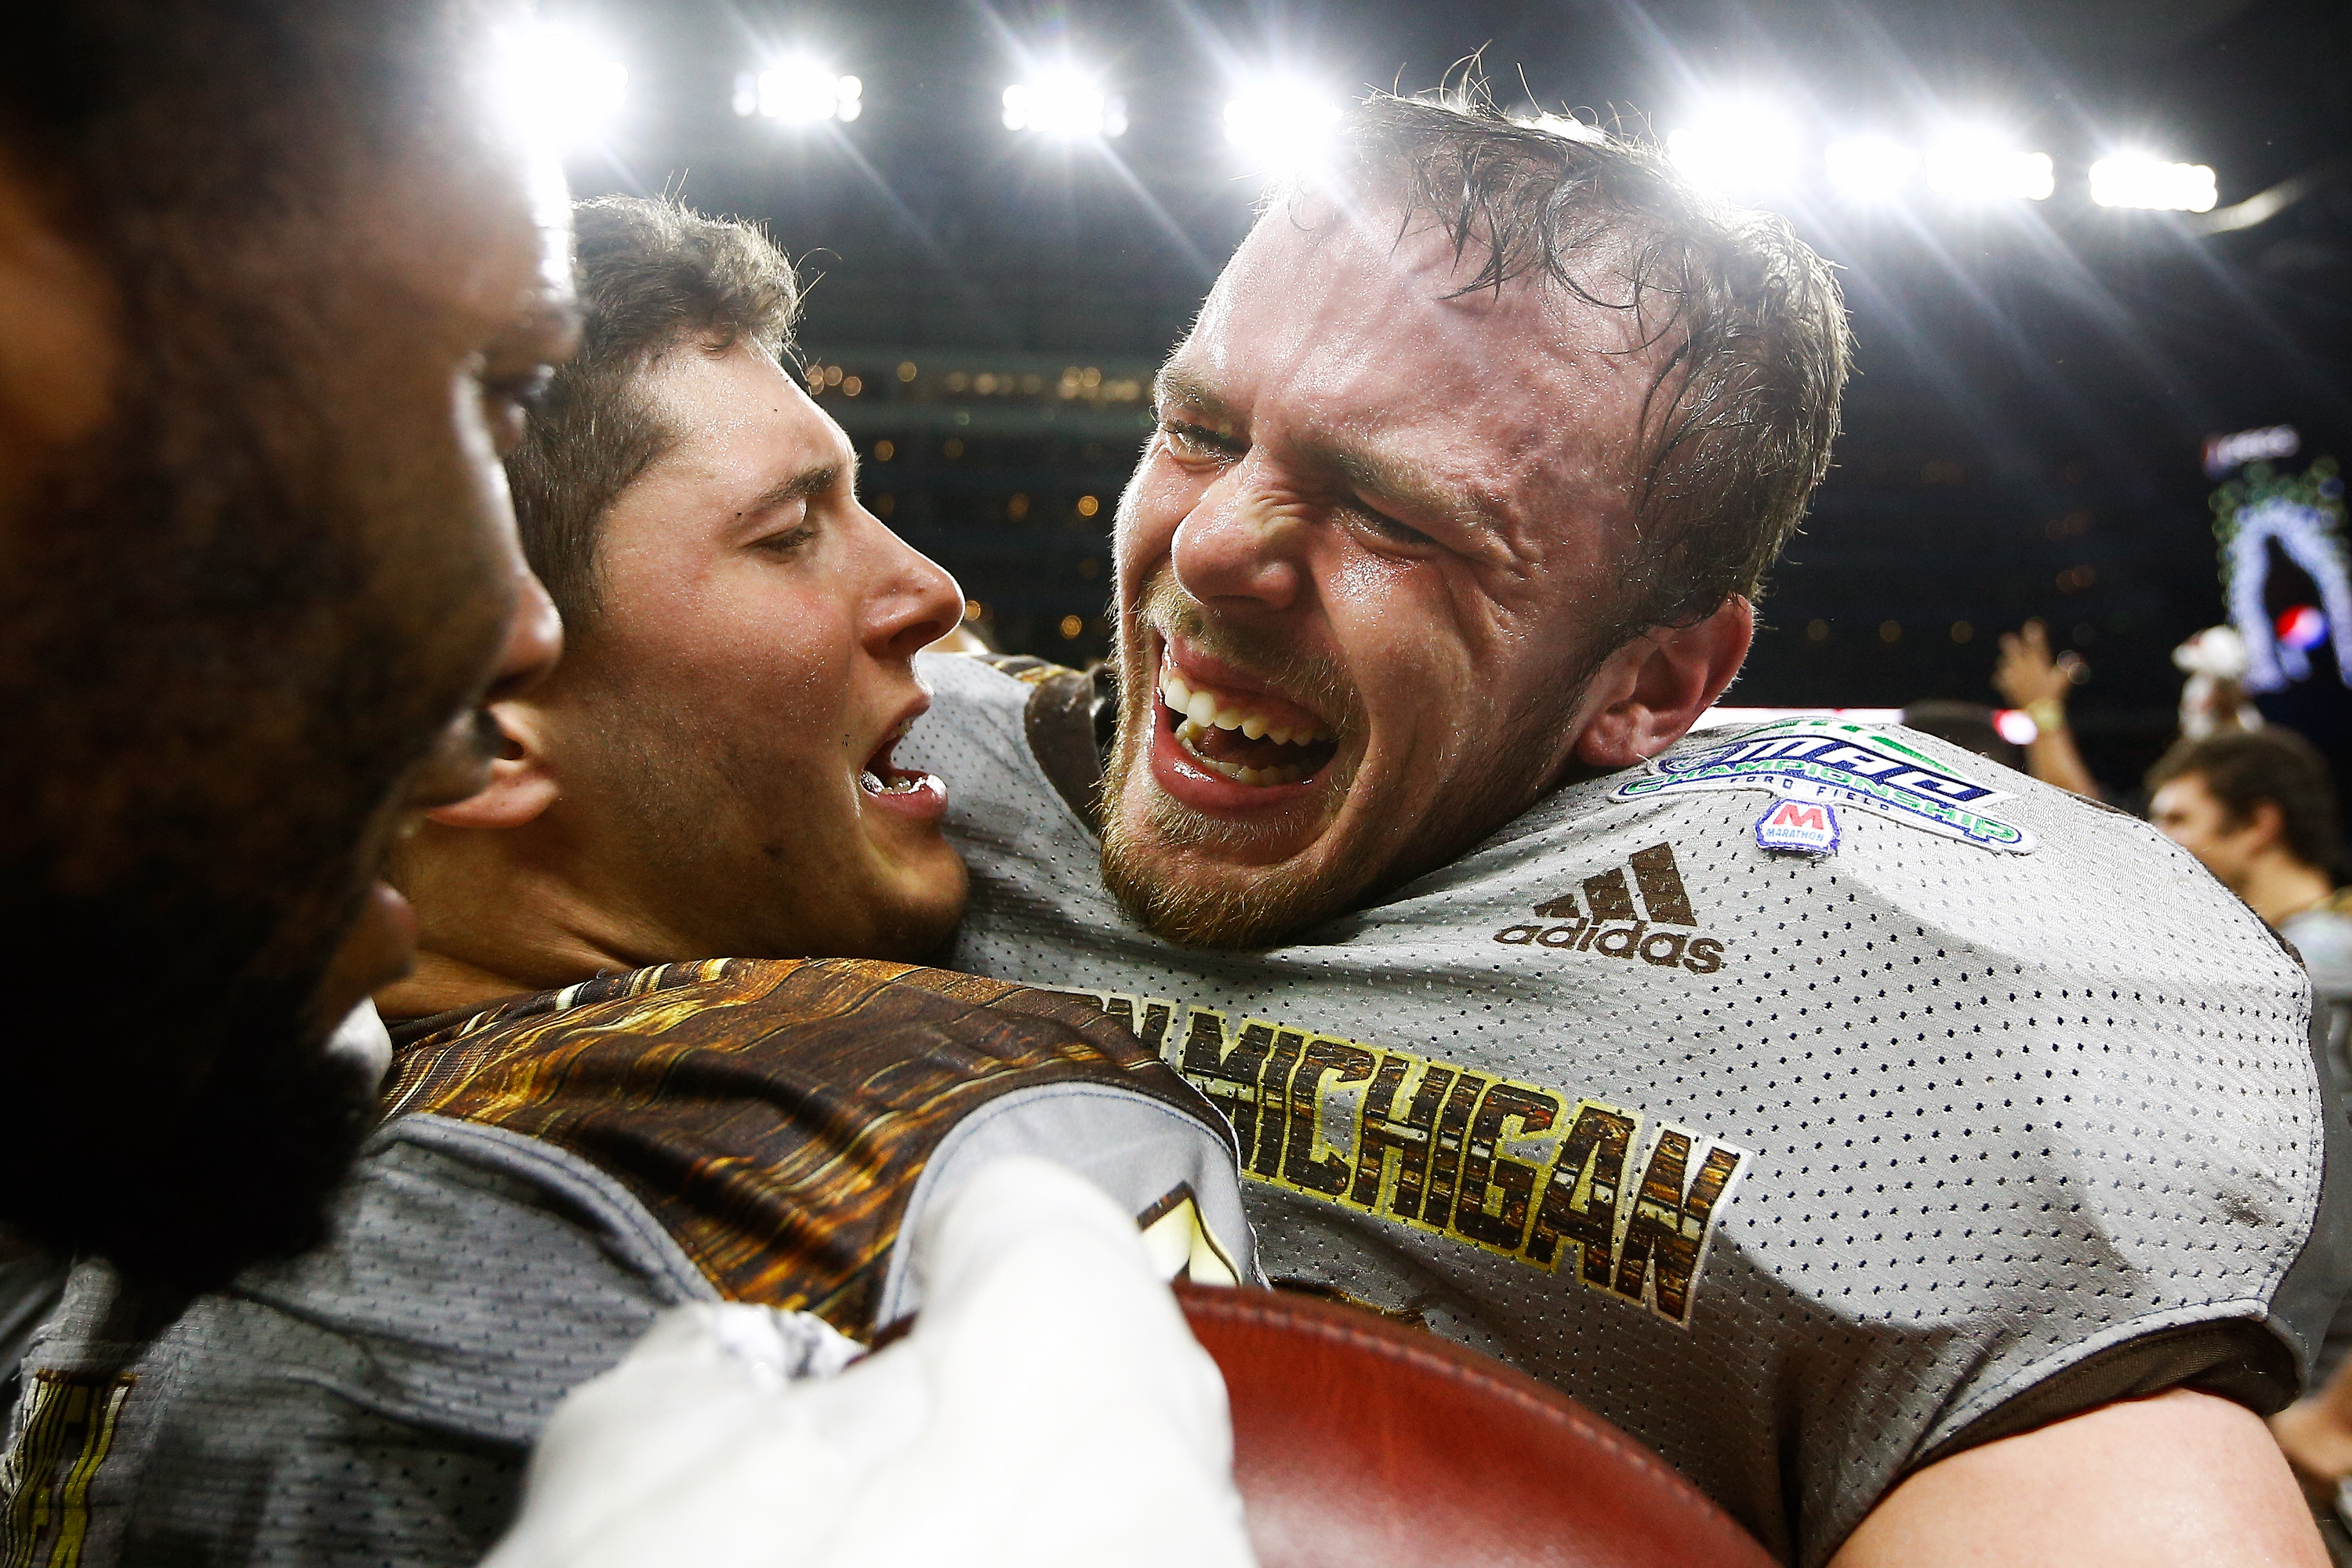 Western Michigan linebacker Robert Spillane (10) is greeted by teammates after a game winning interception  during the second half of the NCAA college football Mid-American Conference championship game against Ohio at Ford Field in Detroit, Friday, Dec. 2, 2016. WMU defeated Ohio 29-23 and is 13-0 on the season.